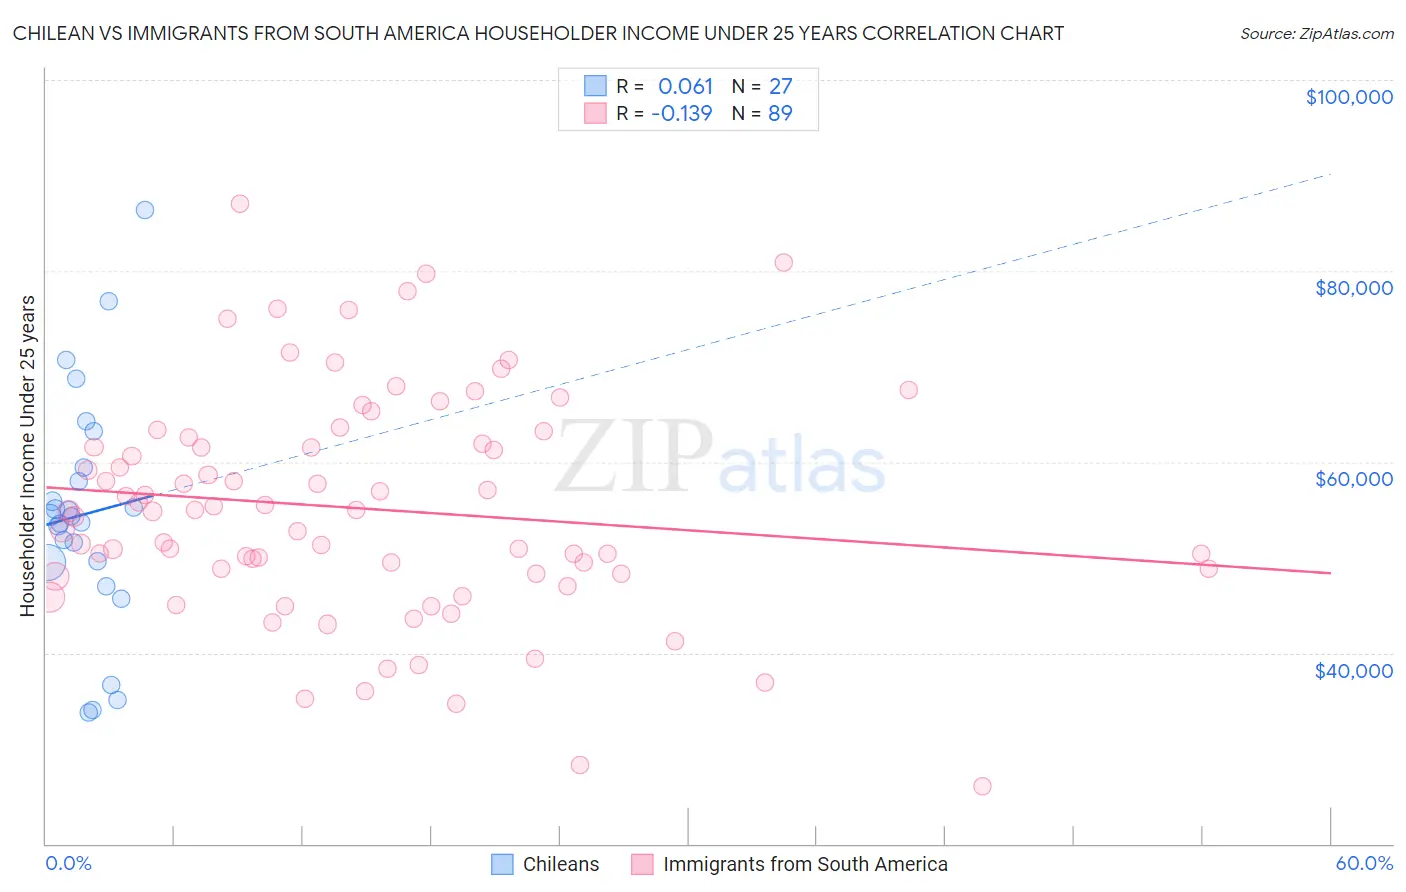 Chilean vs Immigrants from South America Householder Income Under 25 years